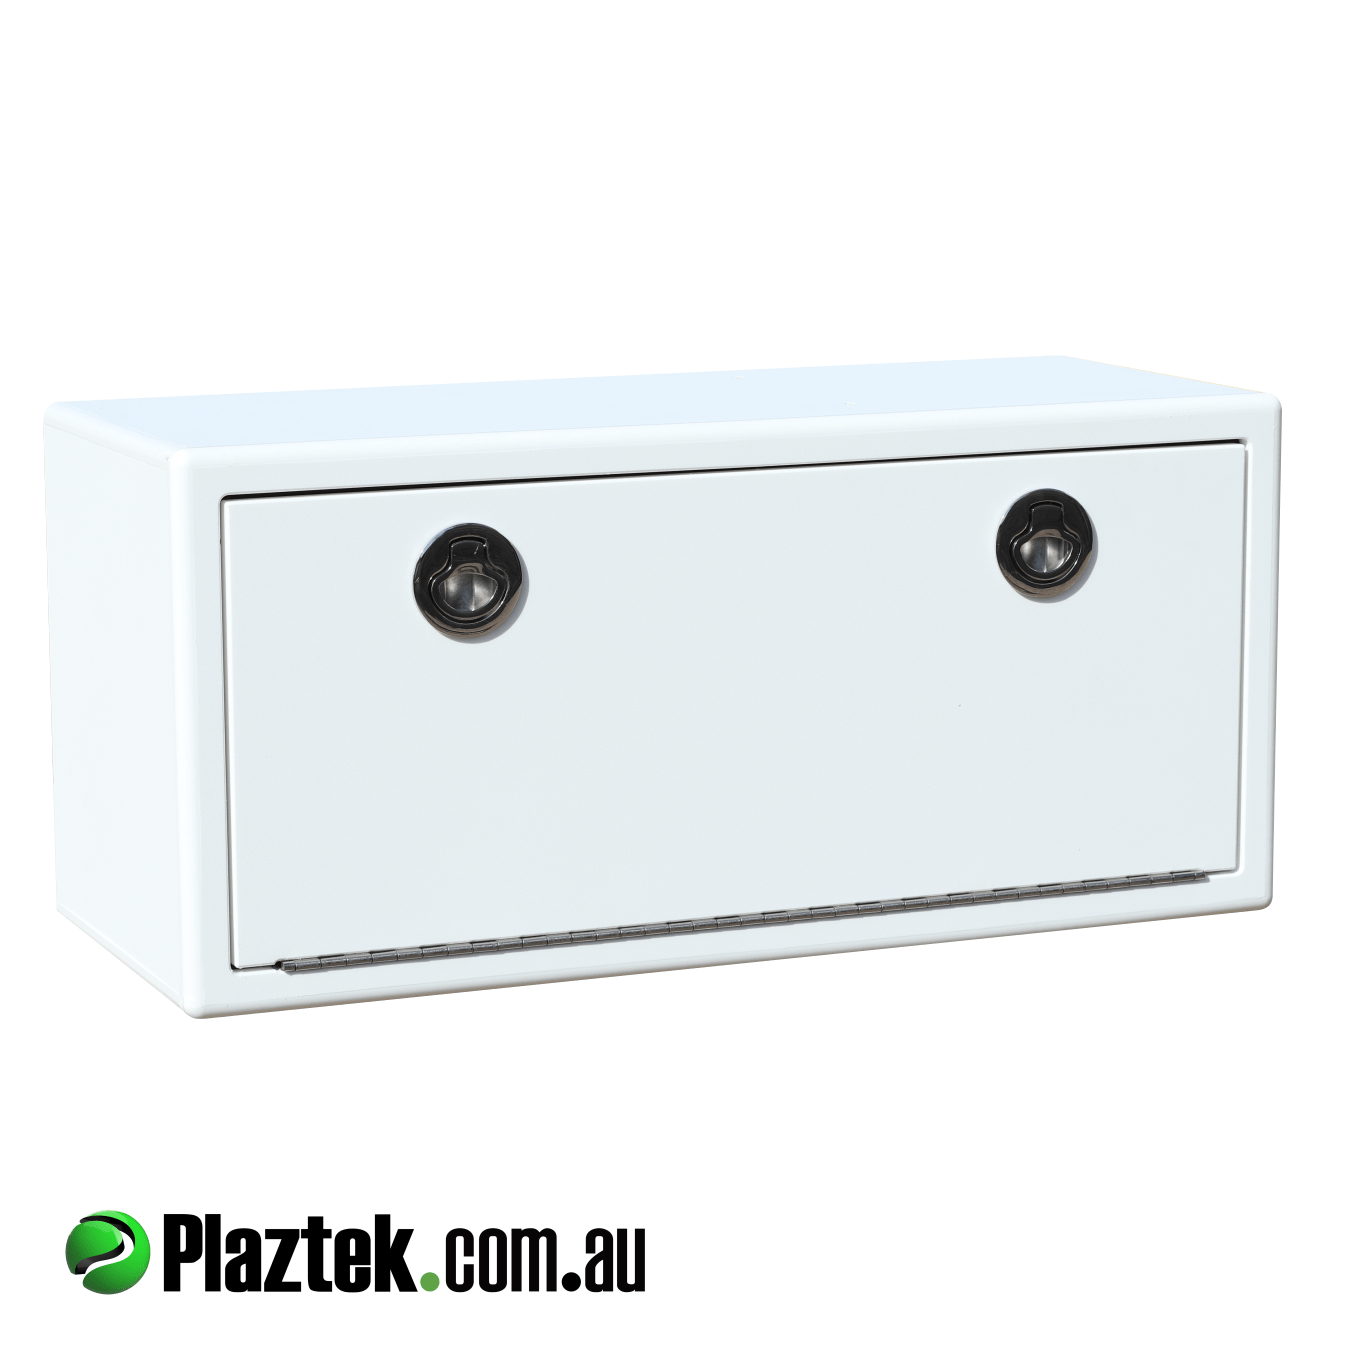 Plaztek fishing tackle cabinet, made to store plano tackle trays in the 3700 series range